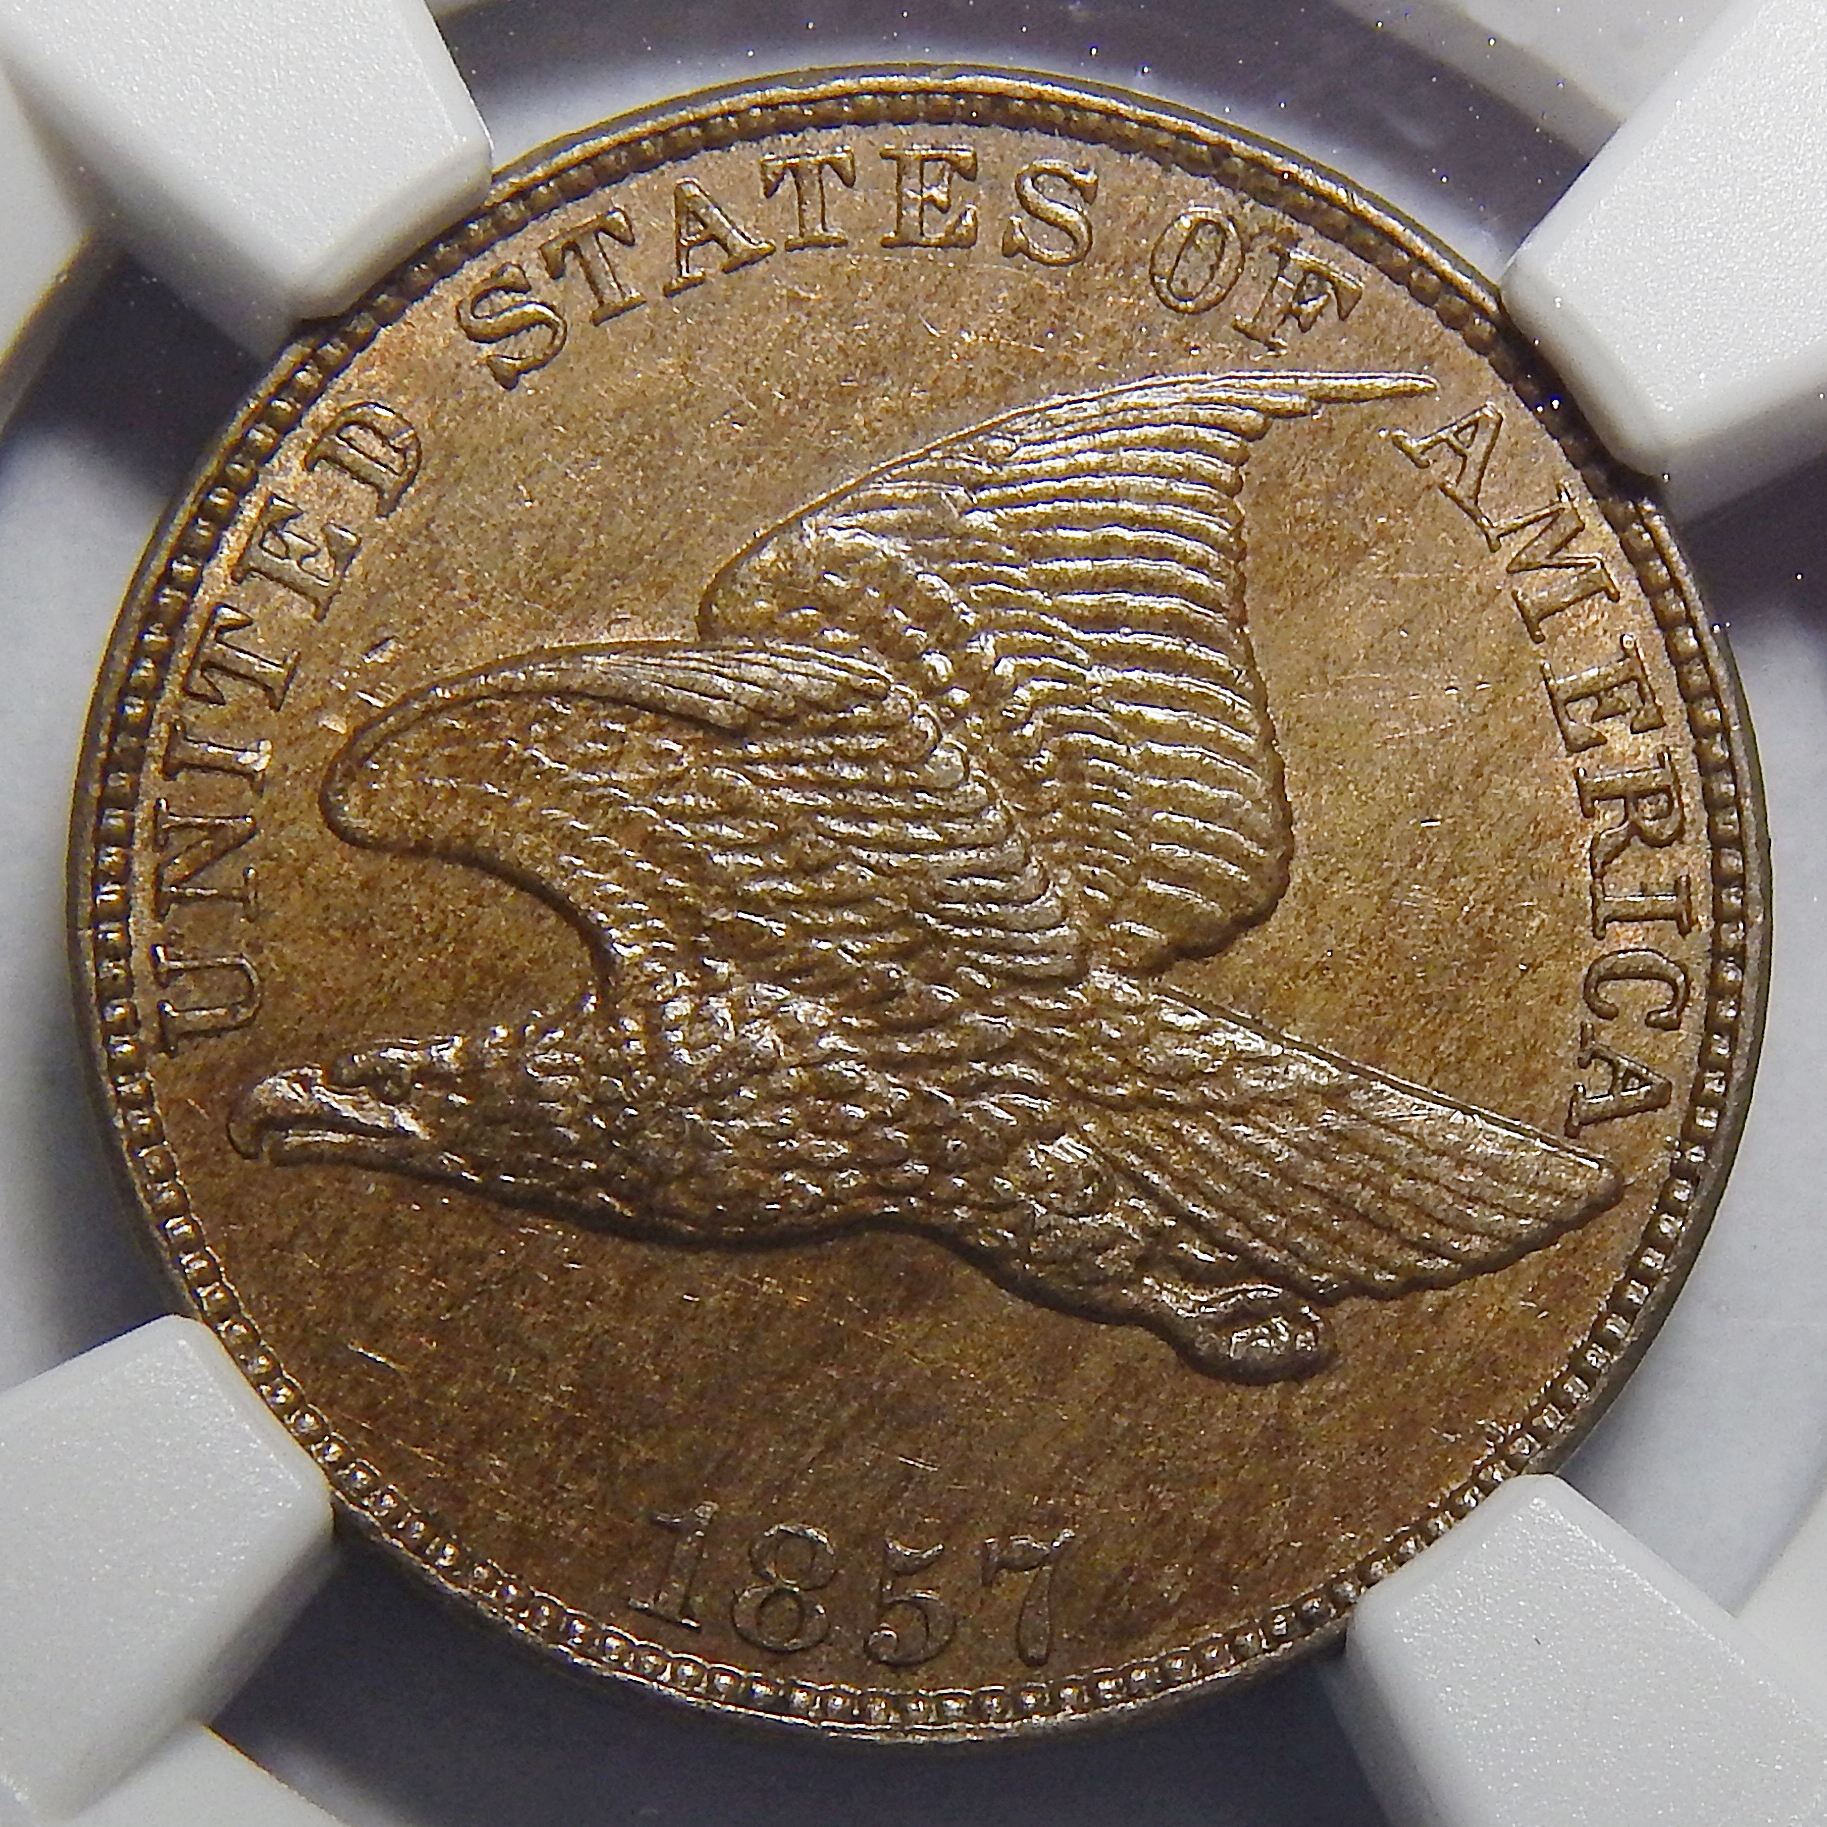 Flying Eagle Cent (1856-1858) - Coins for sale on Collectors Corner